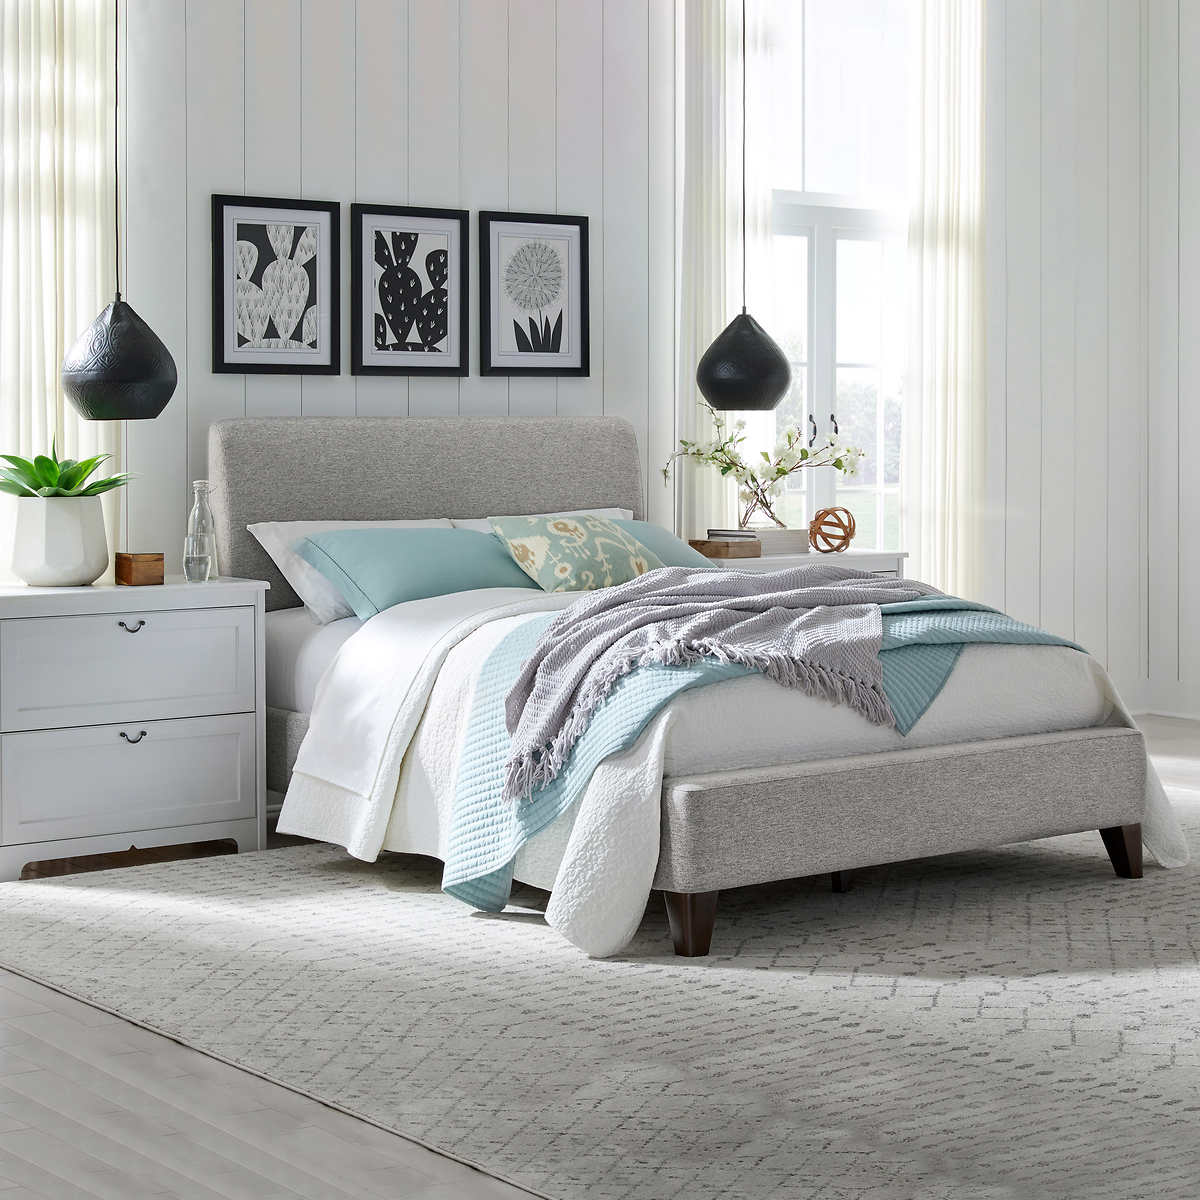 Cecelia Queen Upholstered Bed Costco, Queen Gray Tufted Headboard And Footboard